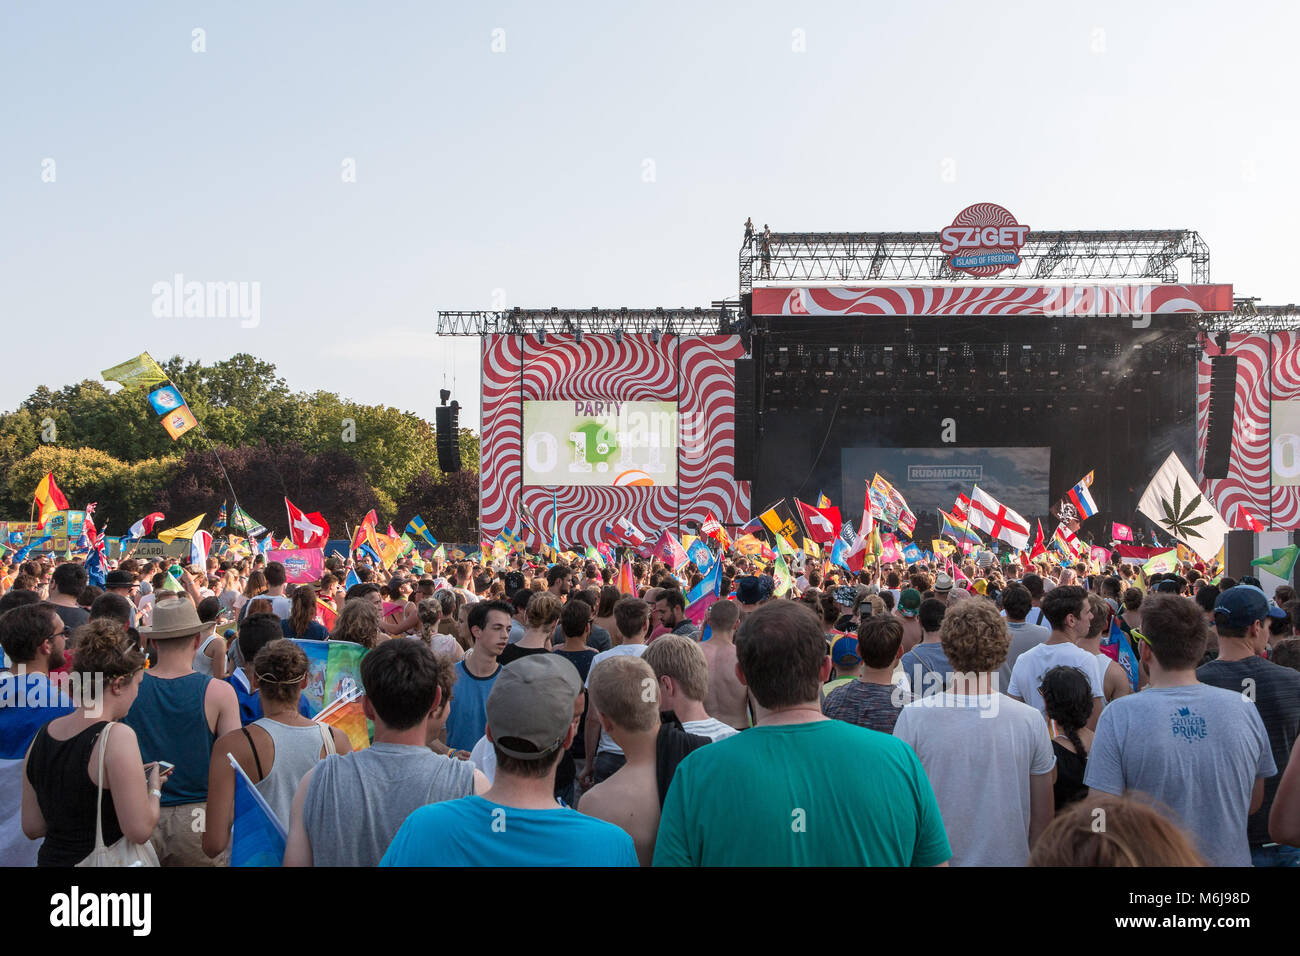 Waving flags at the Sziget Festival in Budapest, Hungary Stock Photo